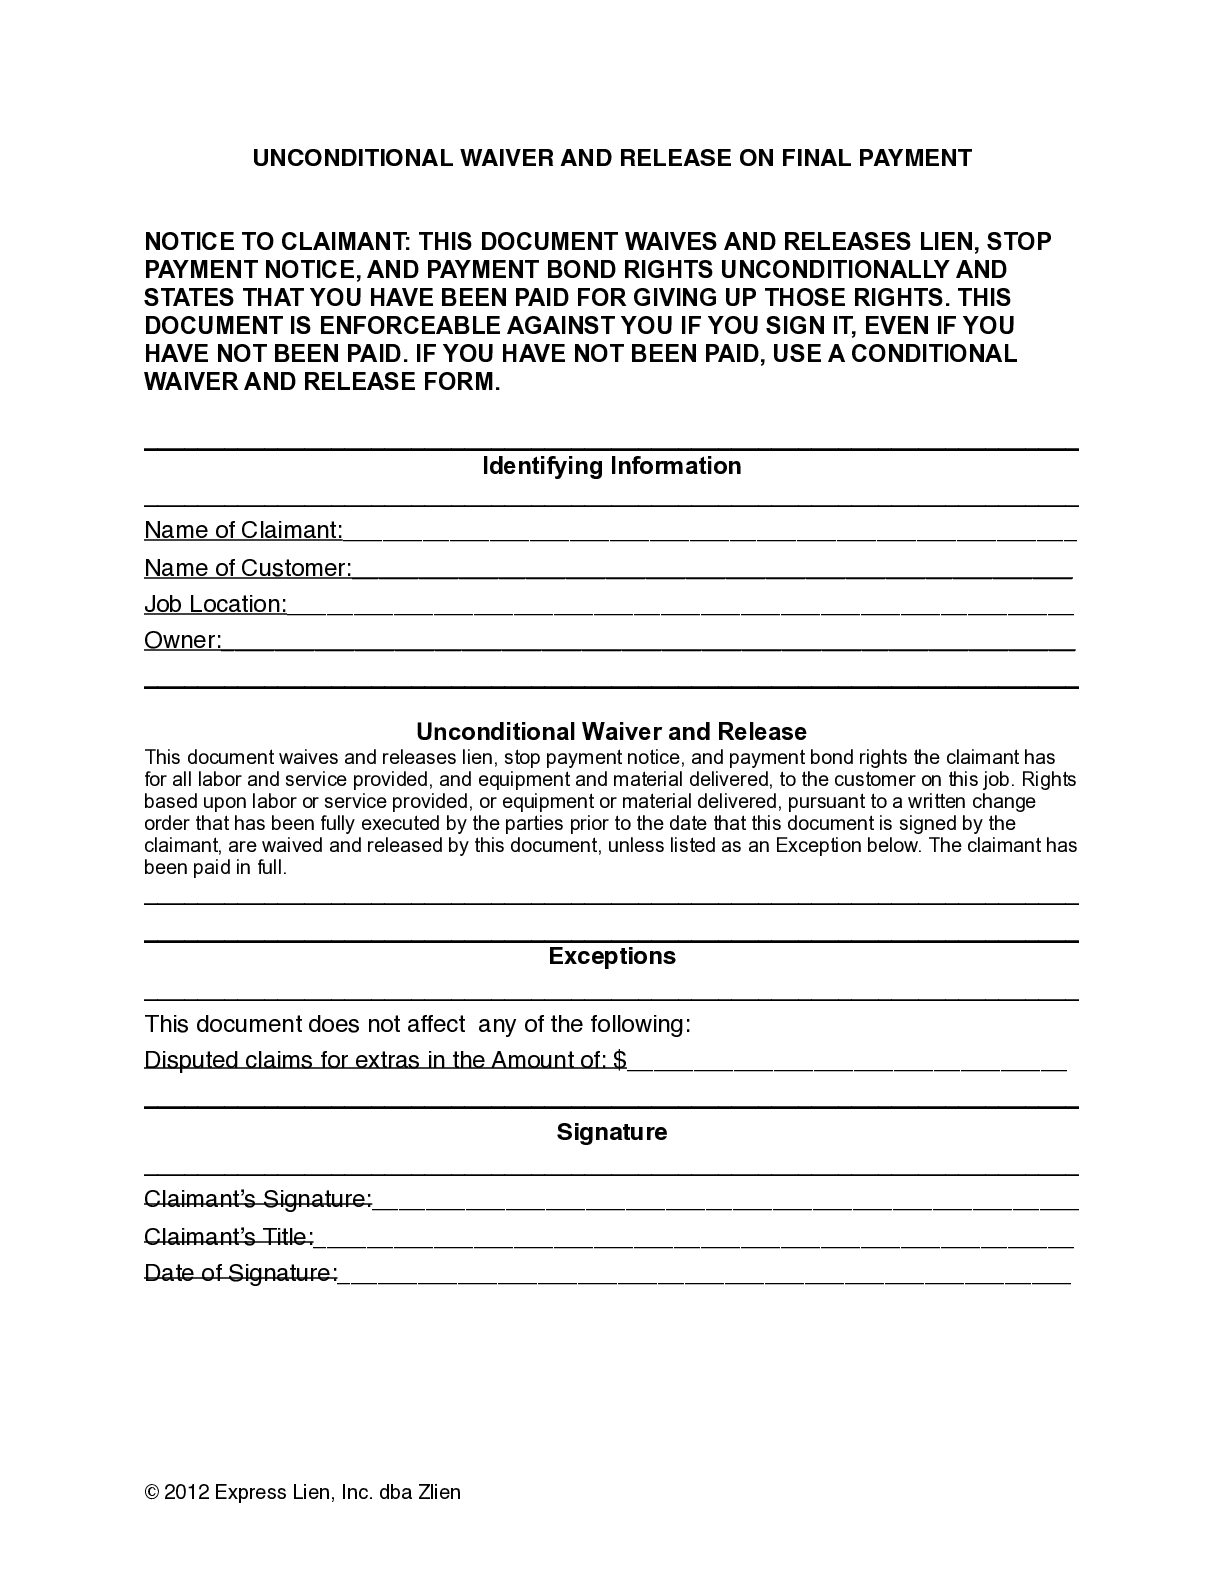 Maryland Final Unconditional Lien Waiver Form - free from